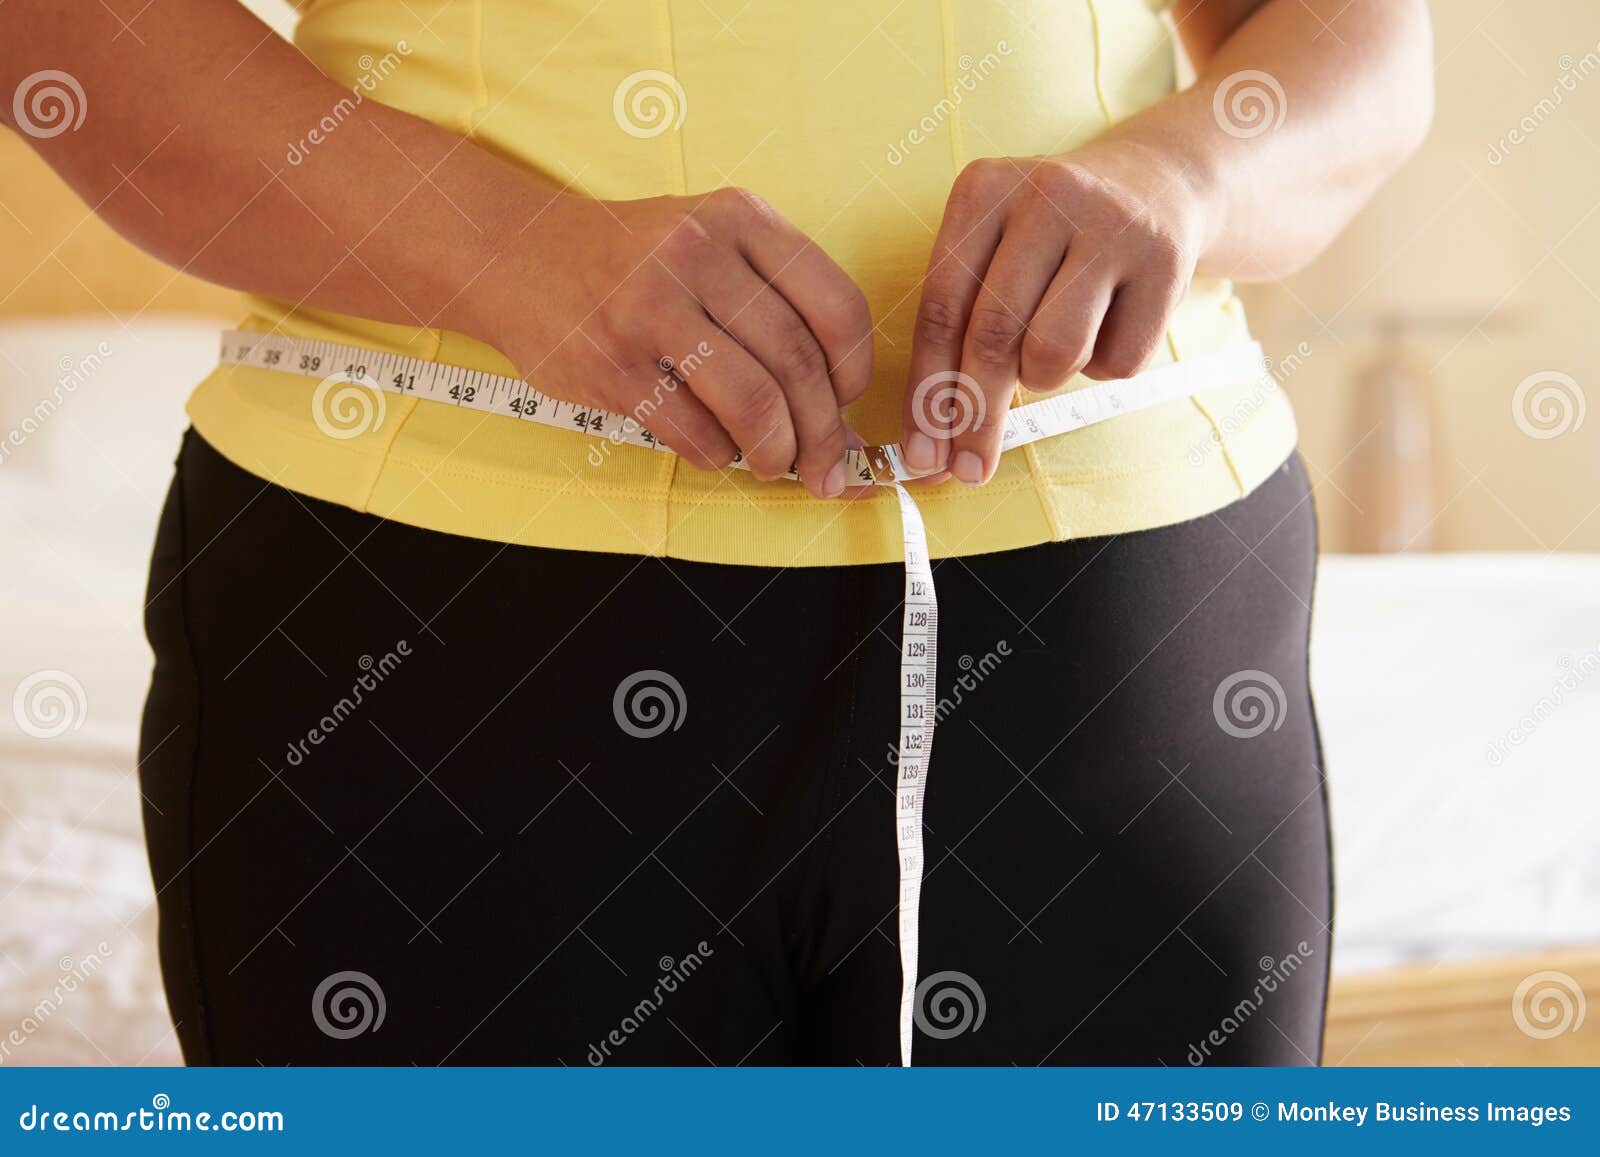 close up of overweight woman measuring waist